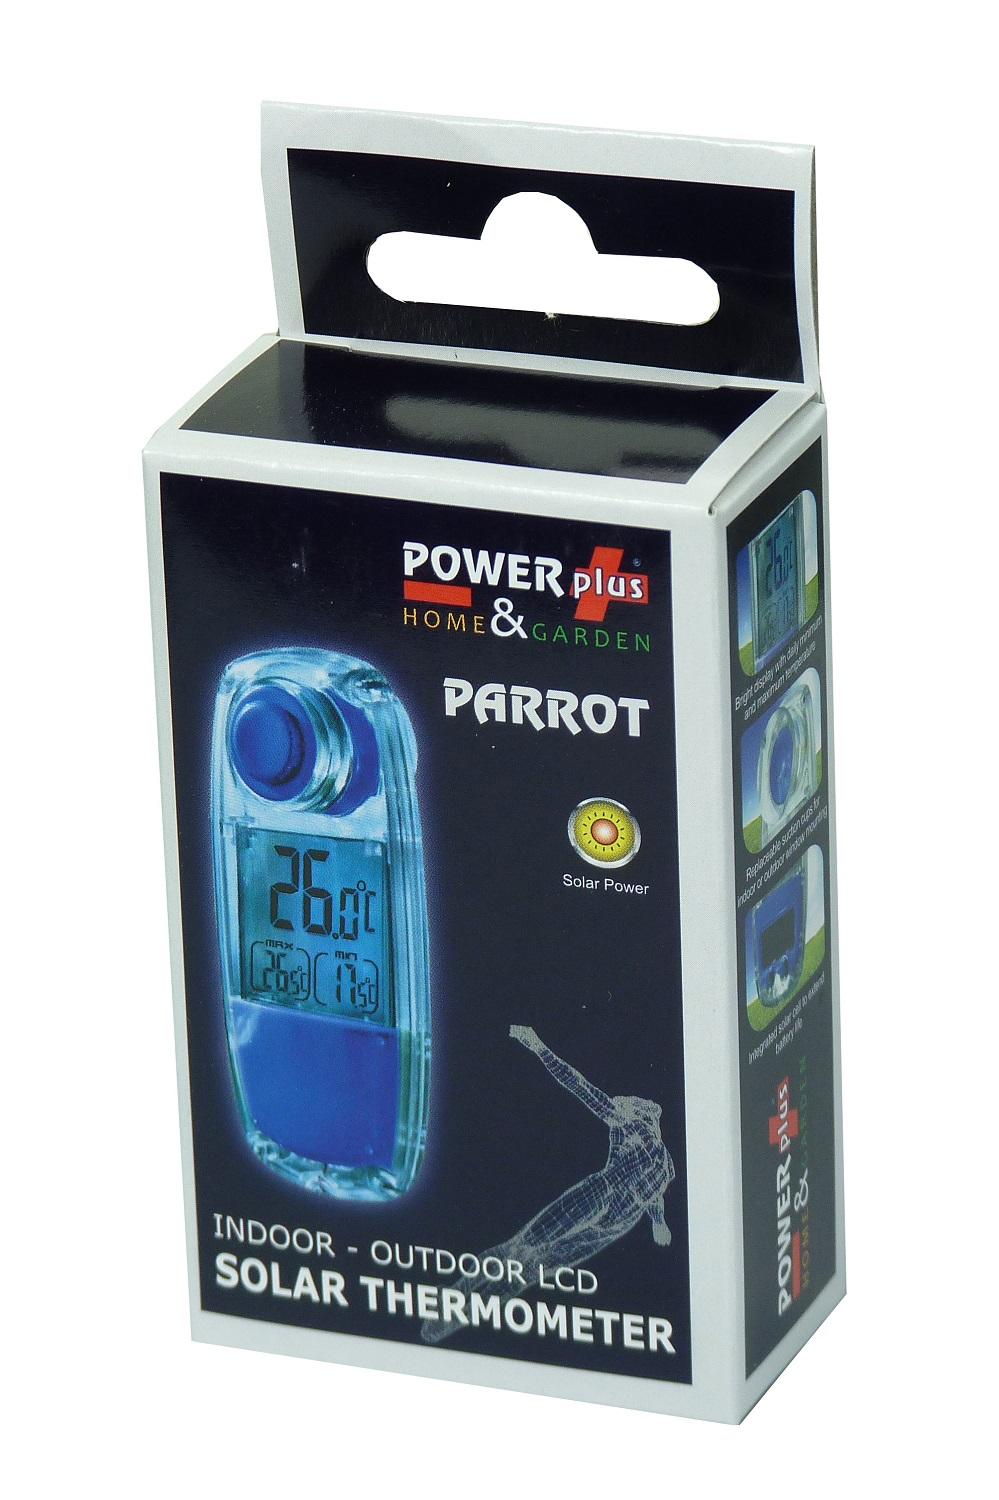 POWERplus Parrot Solar Outdoor and Indoor Thermometer